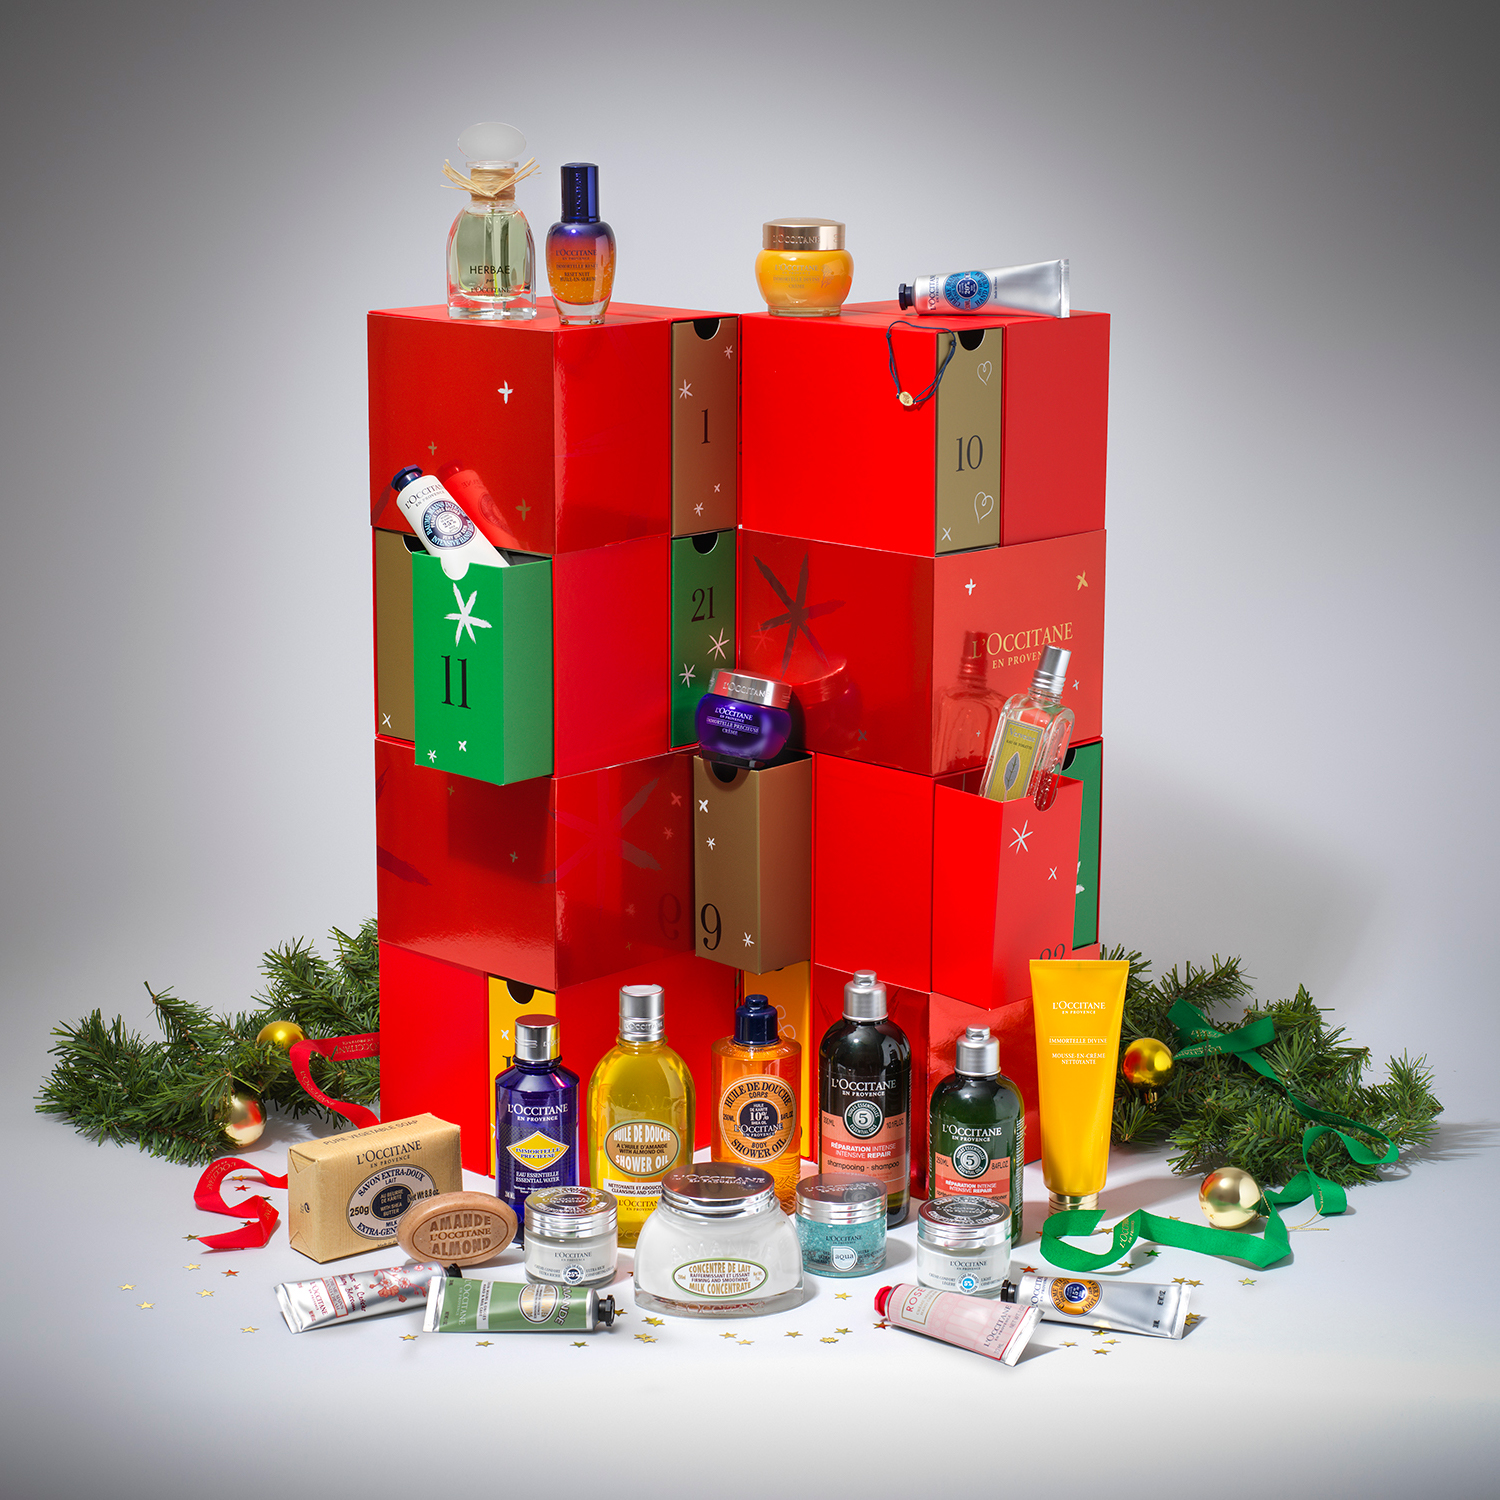 Why L'OCCITANE's advent calendars are the perfect gift for yourself or